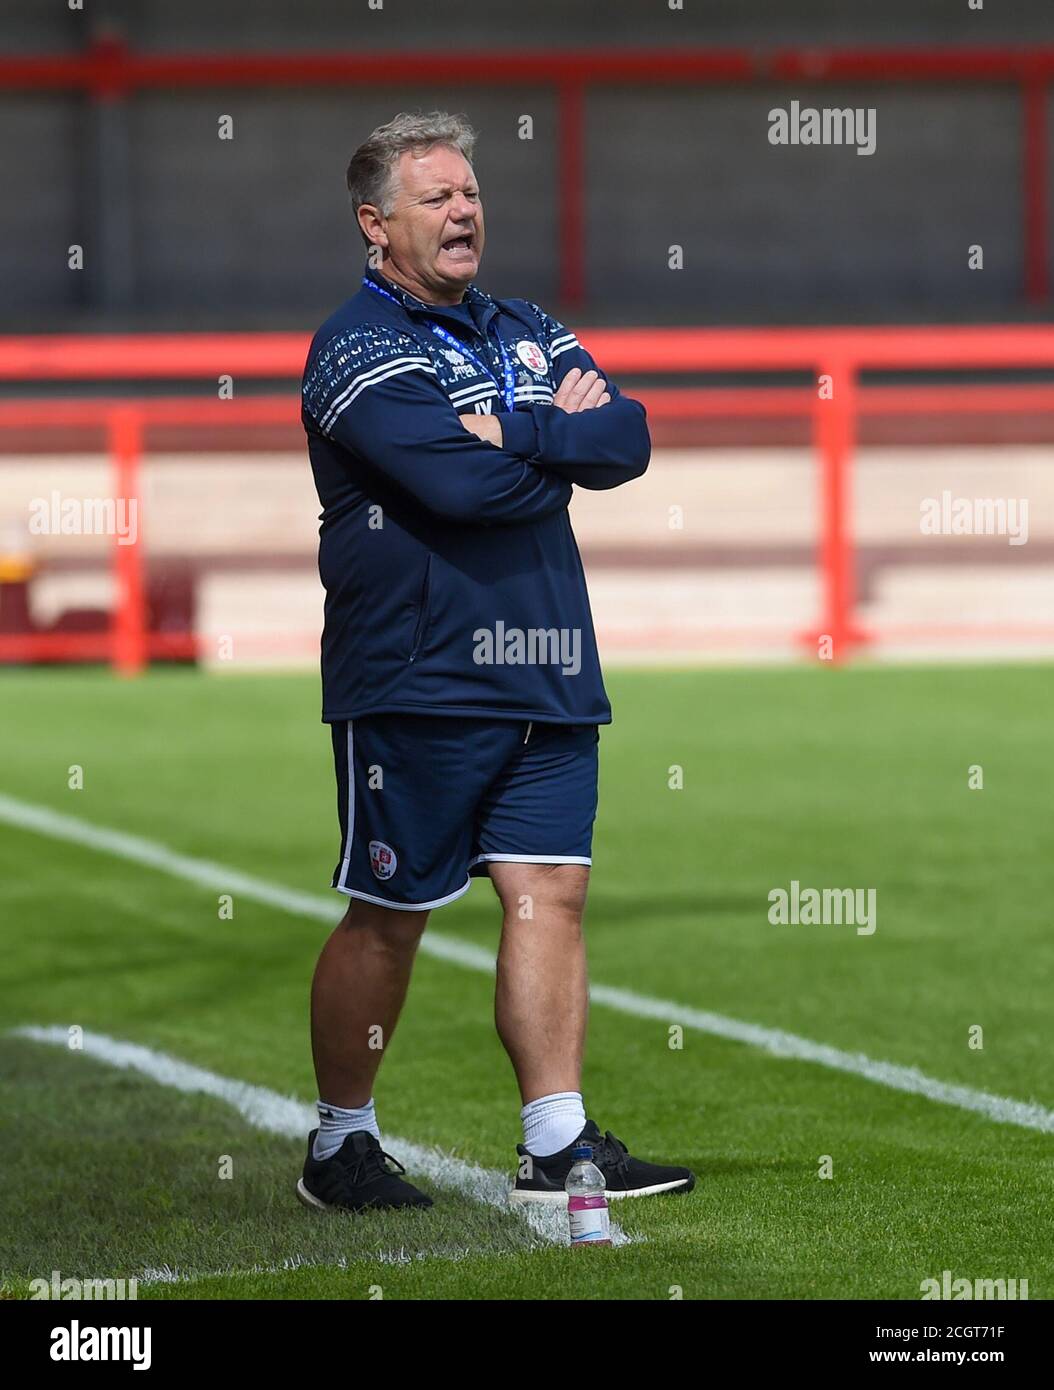 Crawley manager John Yems during the Carabao Cup match between Crawley Town and Millwall at the People's Pension Stadium  , Crawley ,  UK - 5th September 2020 - Editorial use only. No merchandising. For Football images FA and Premier League restrictions apply inc. no internet/mobile usage without FAPL license - for details contact Football Dataco Stock Photo